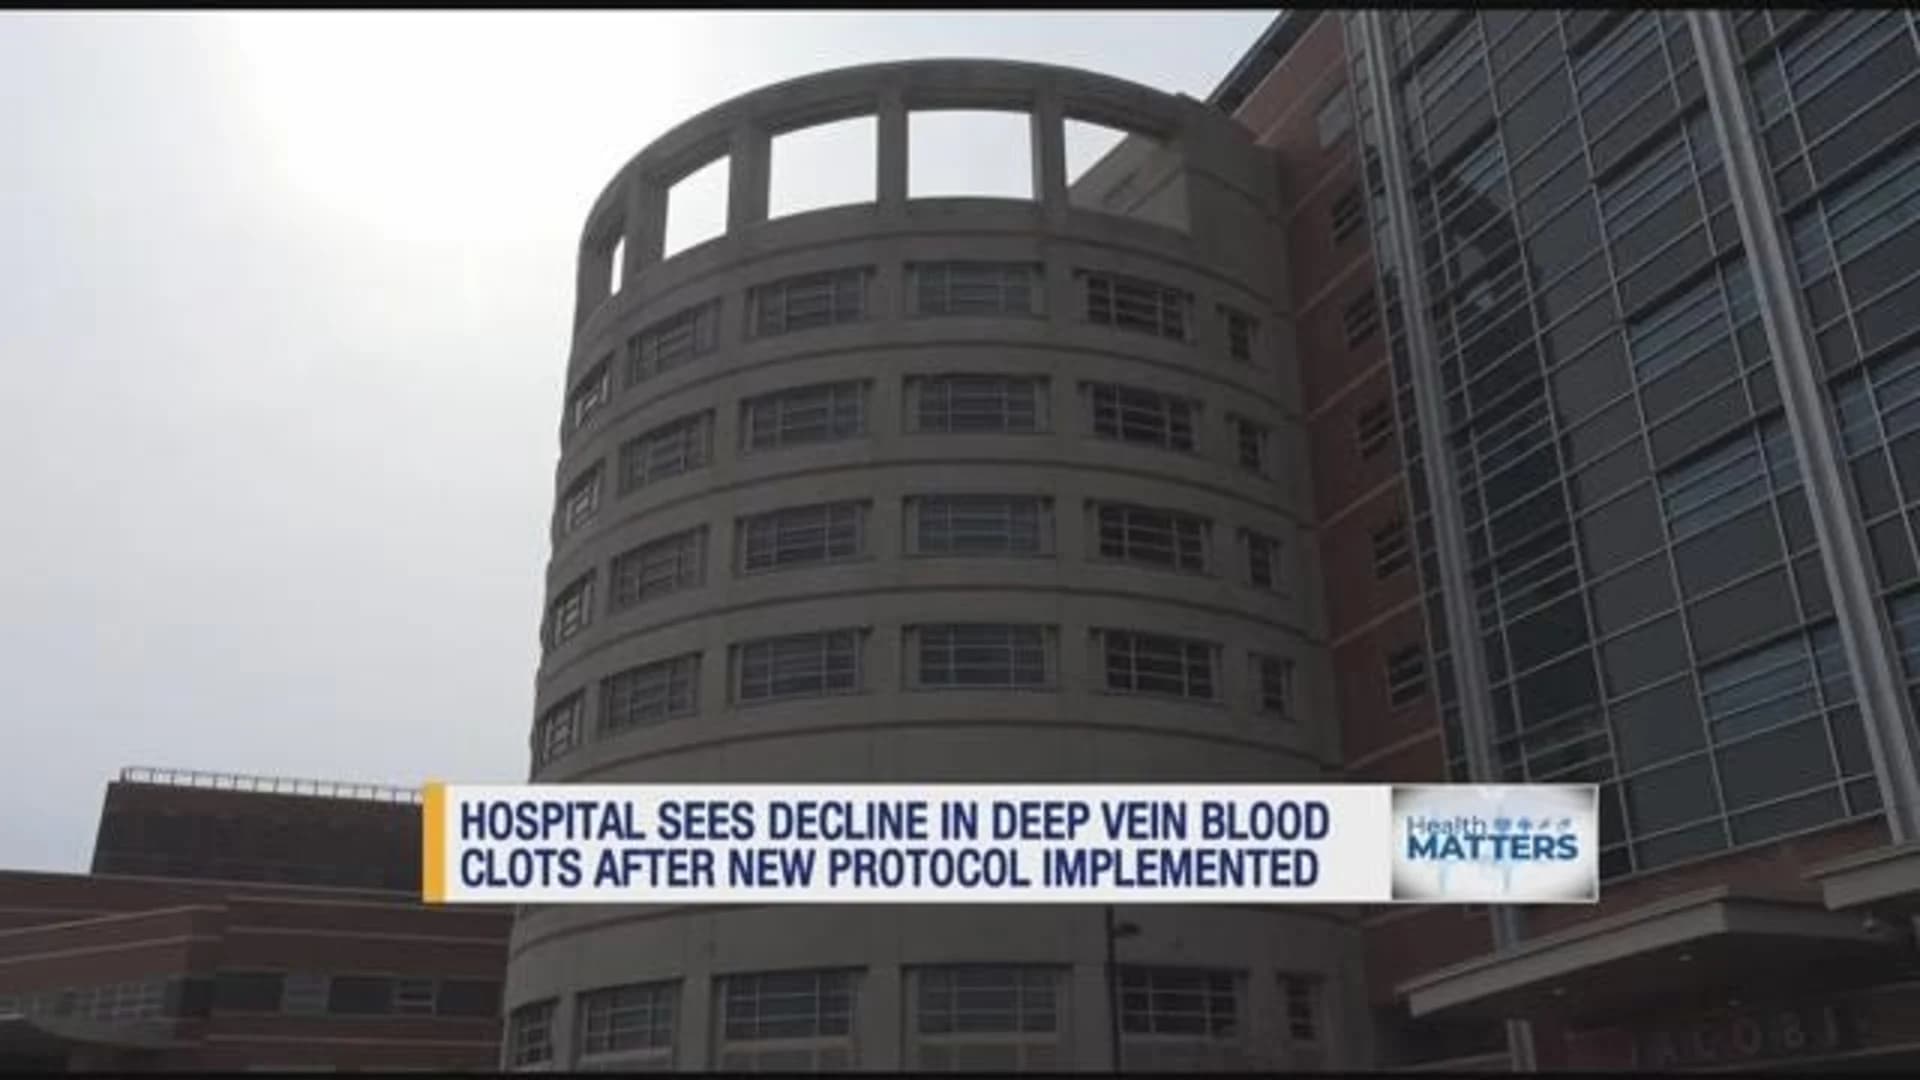 Hospital implements protocol to slash number of deep vein blood clots